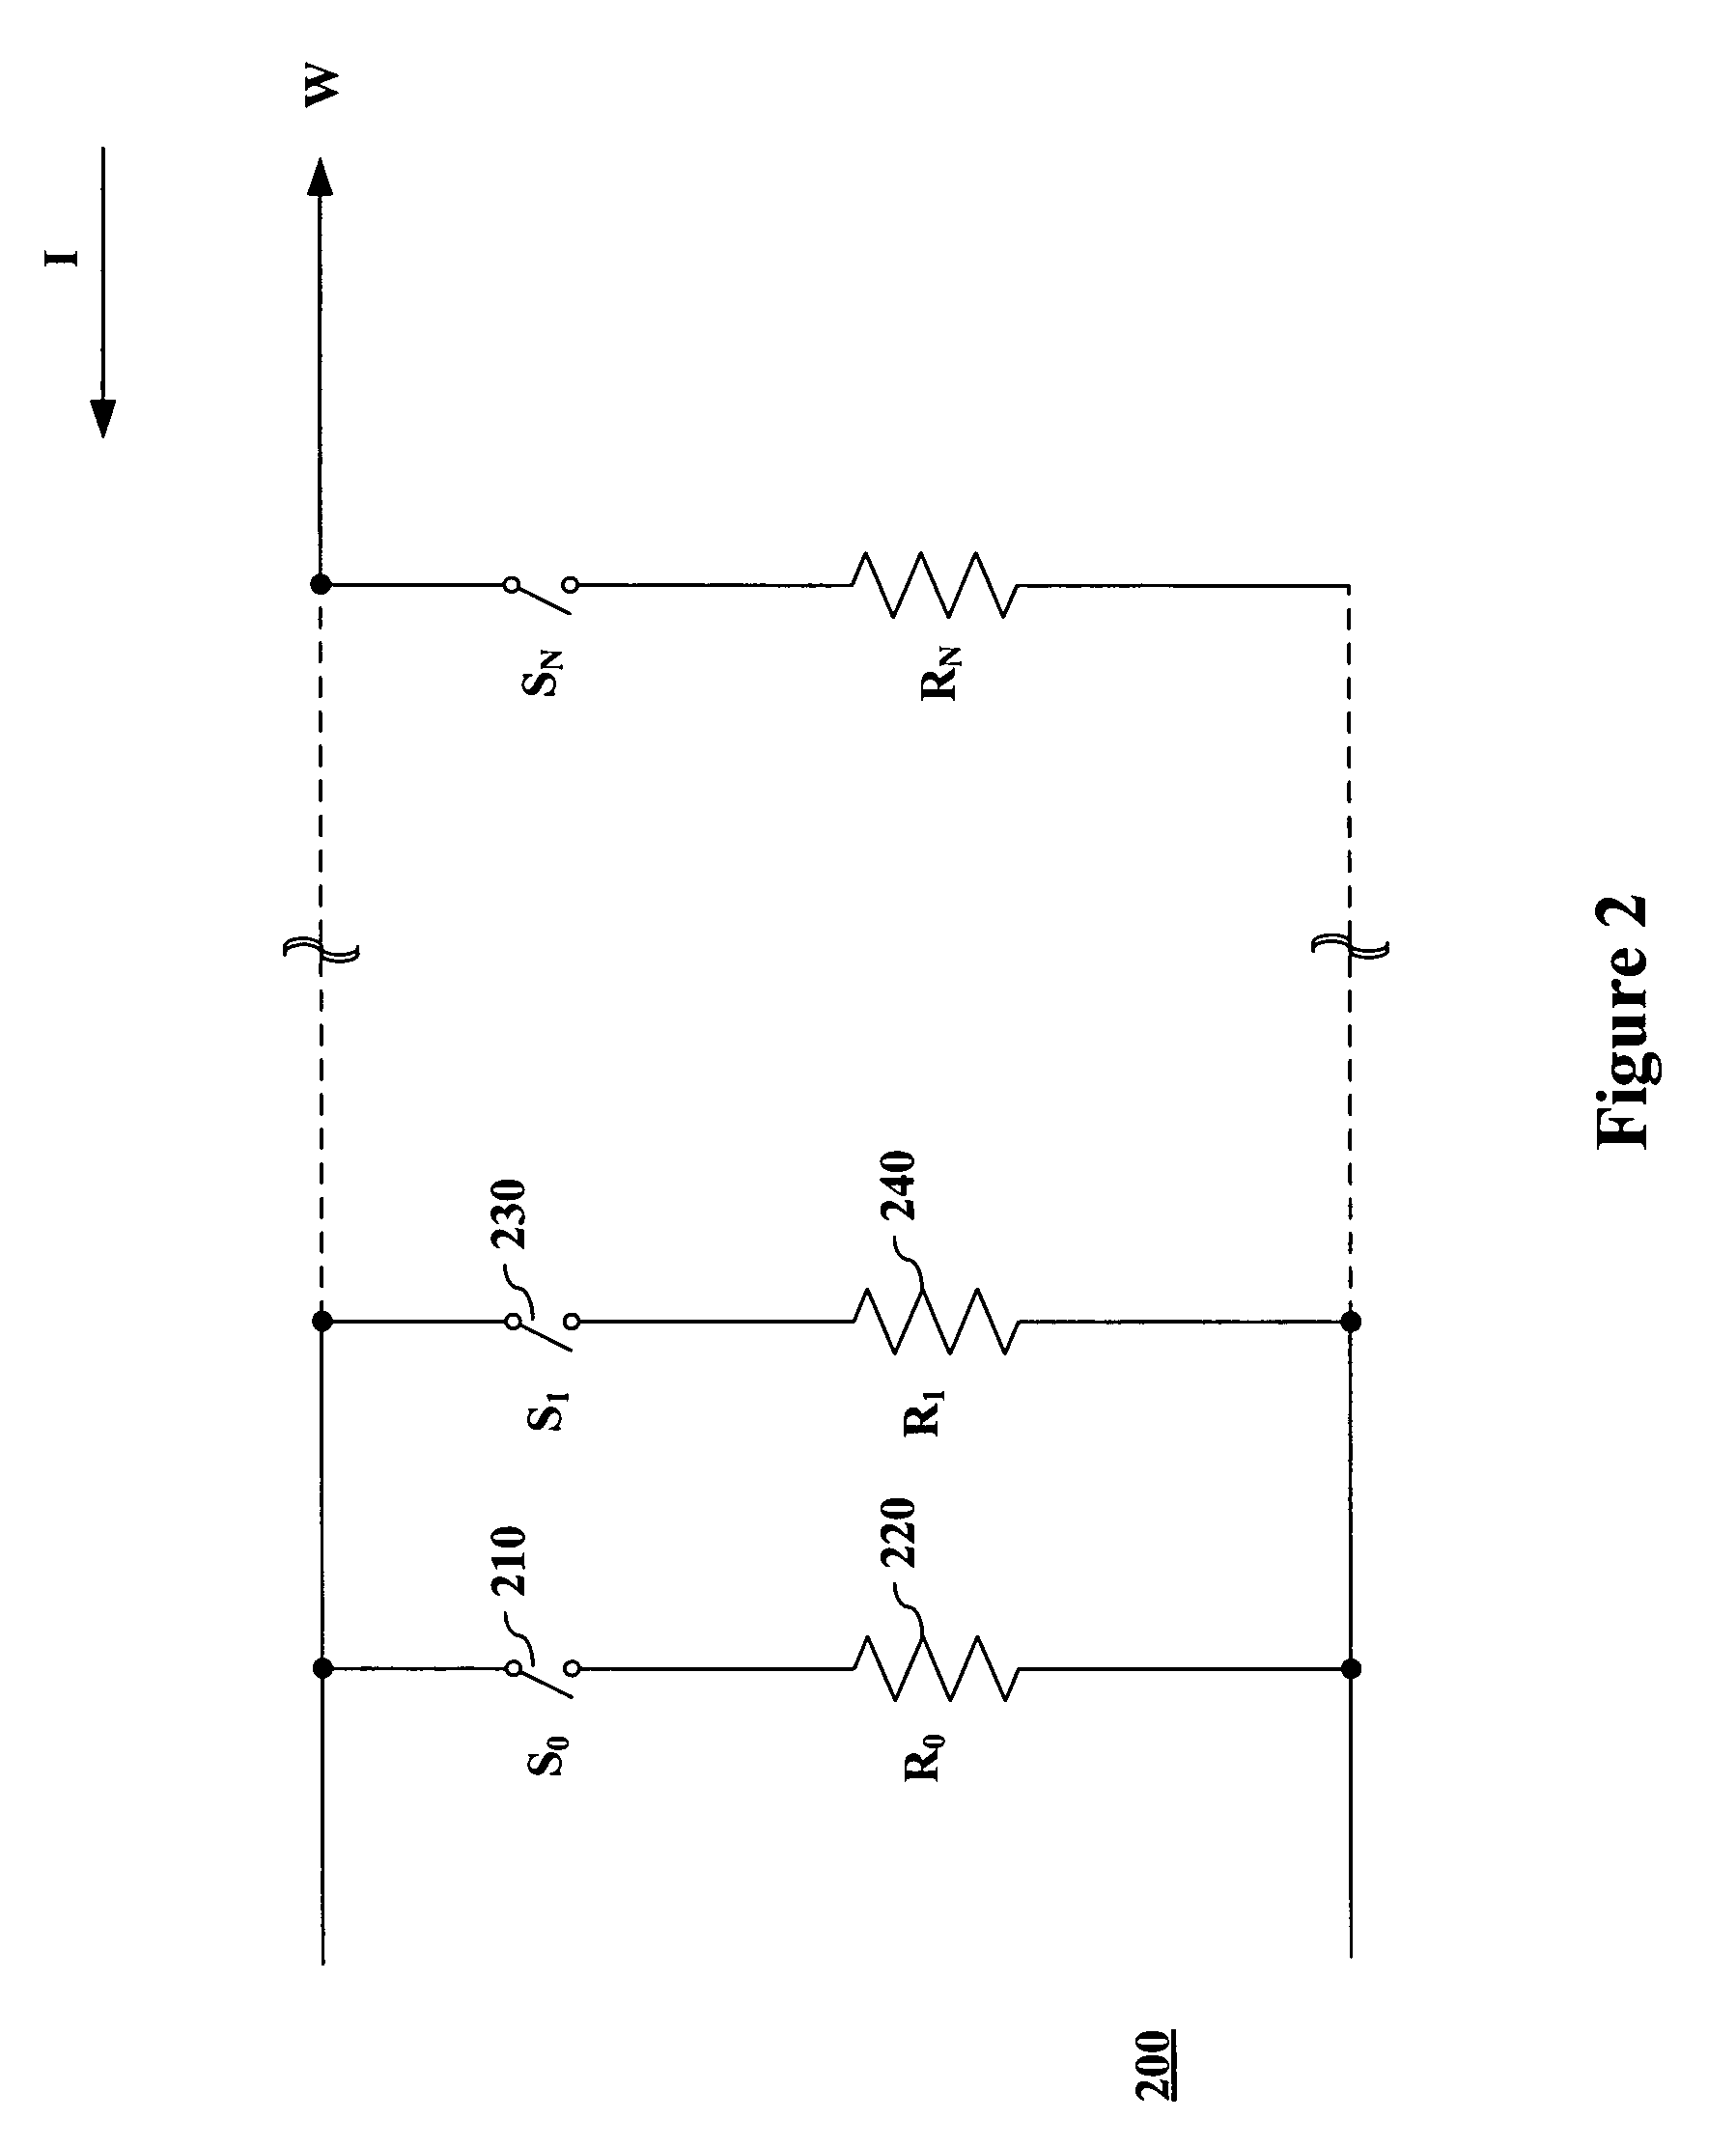 Area-efficient, digital variable resistor with high resolution